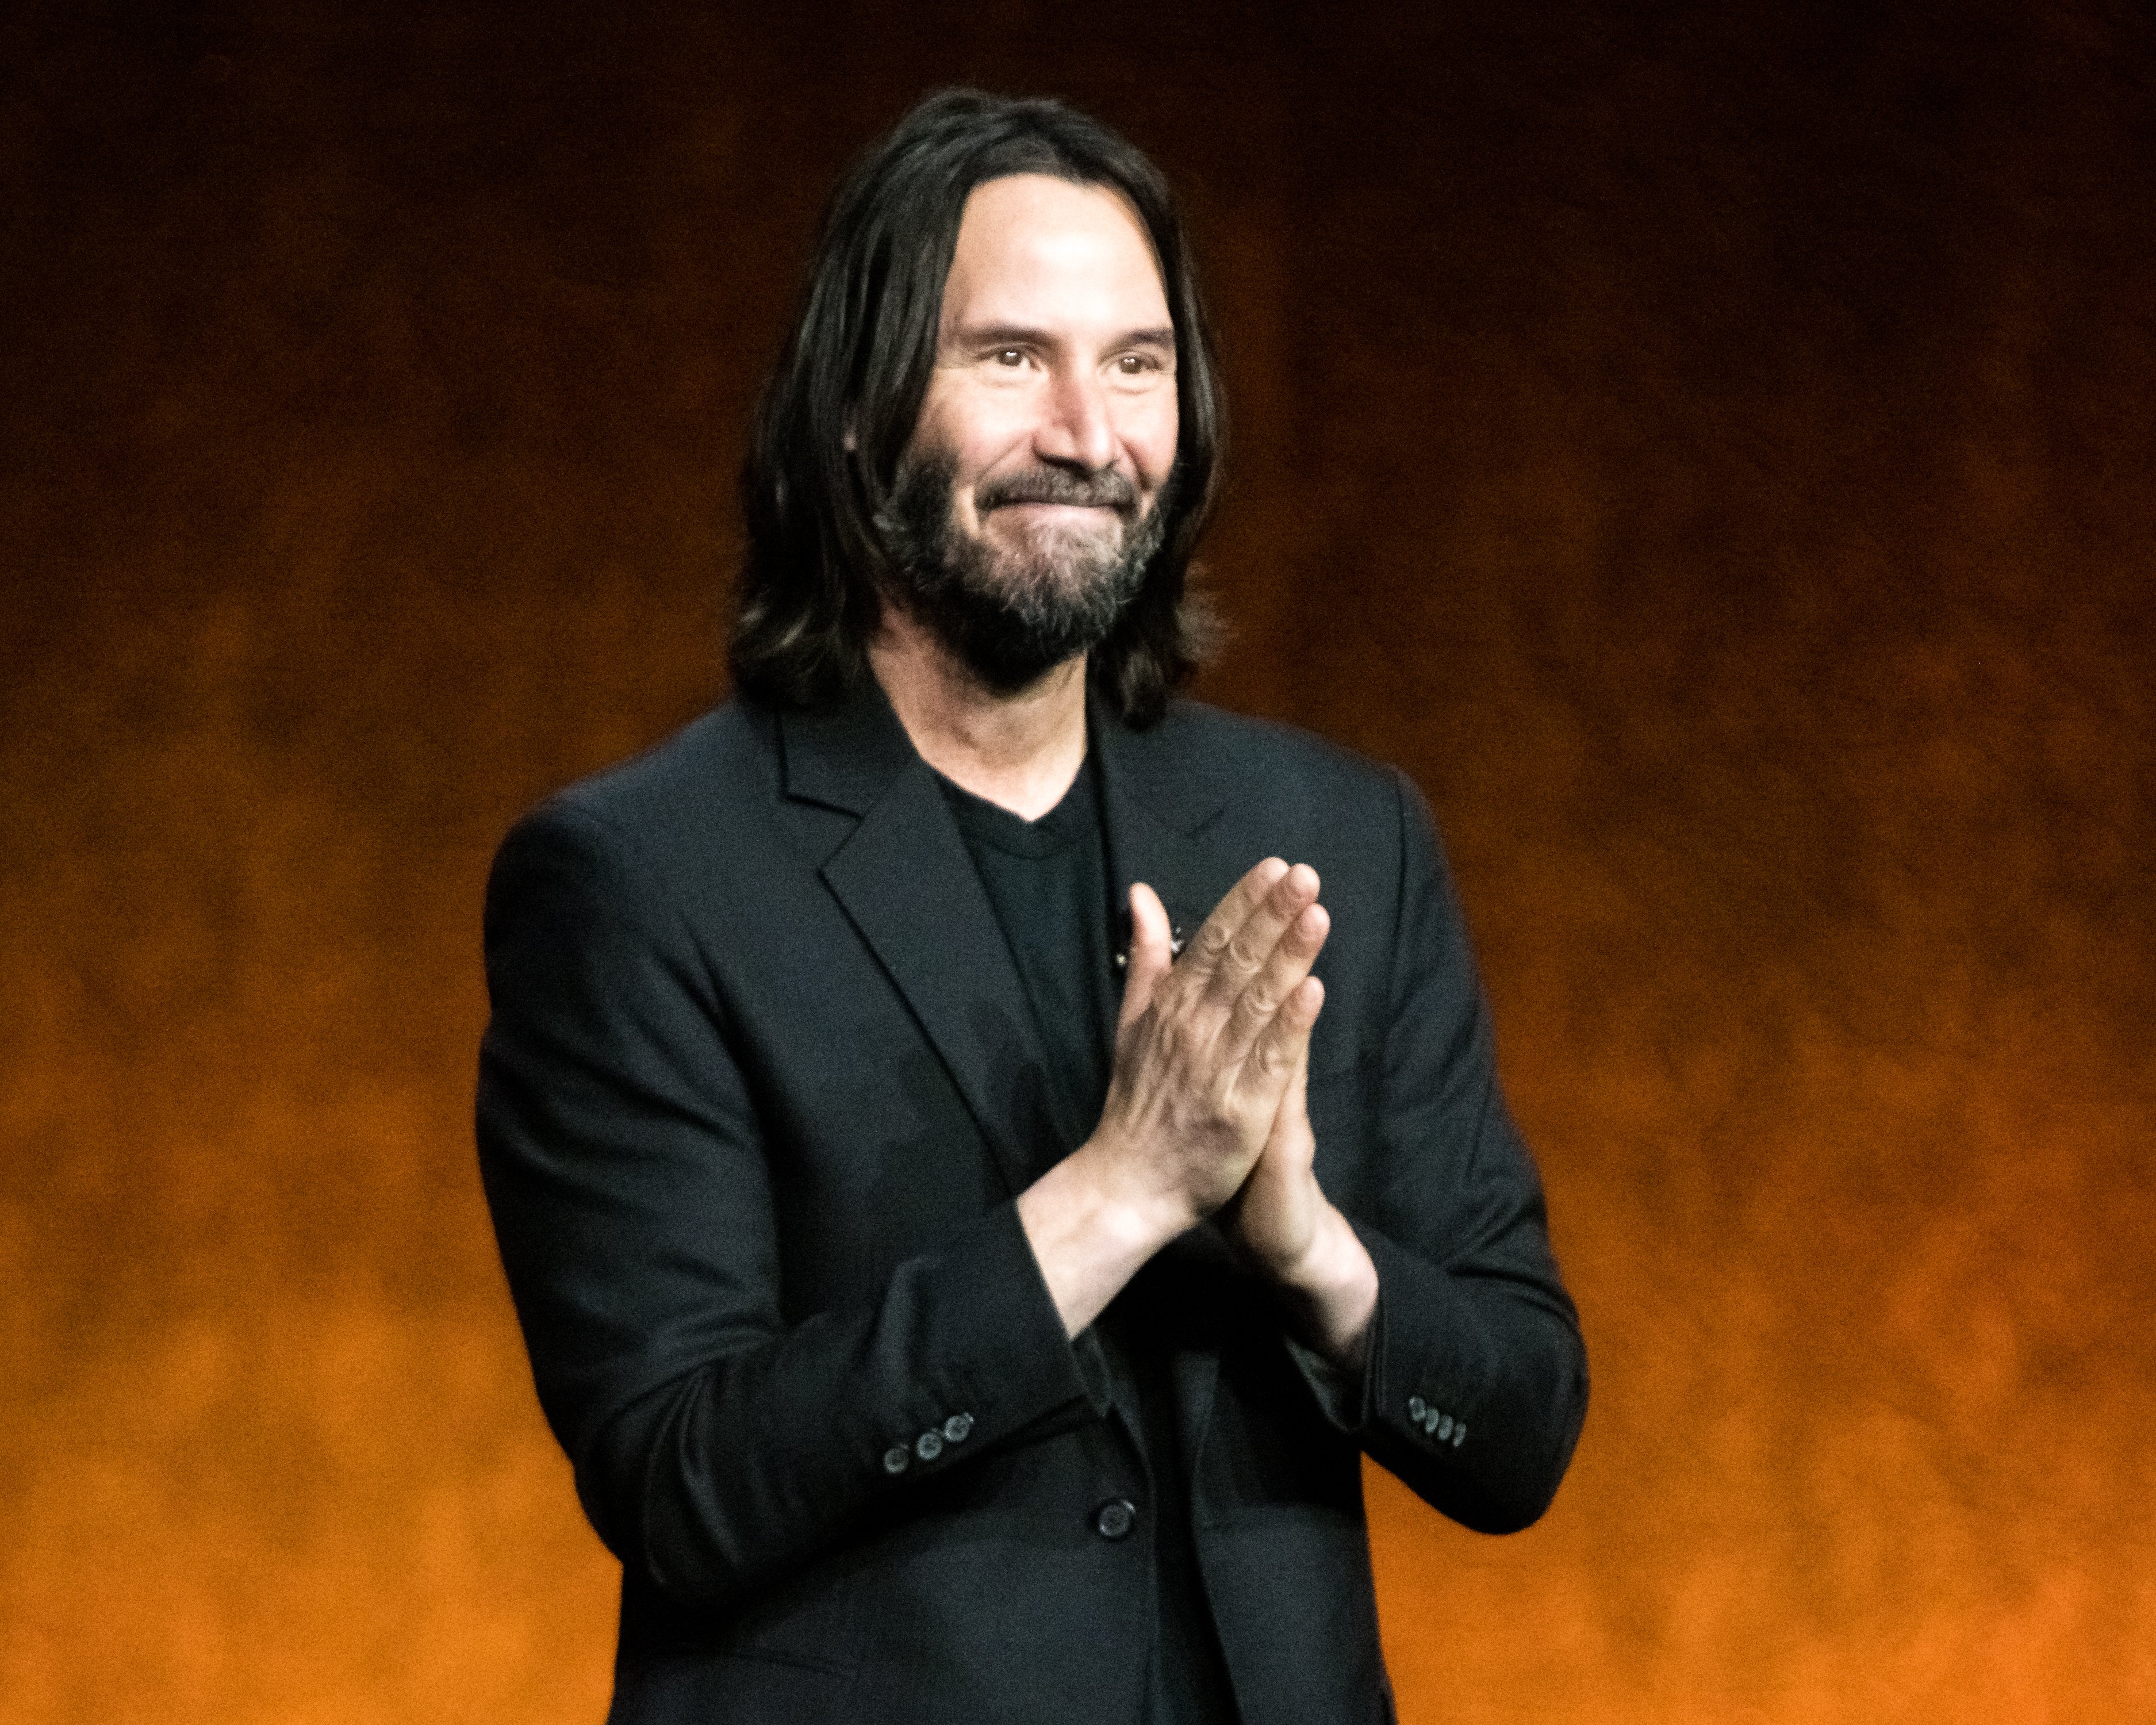 Actor Keanu Reeves presents the movie "John Wick: Chapter 4" during Lionsgate exclusive presentation at Caesars Palace during CinemaCon 2022. | Source: Getty Images